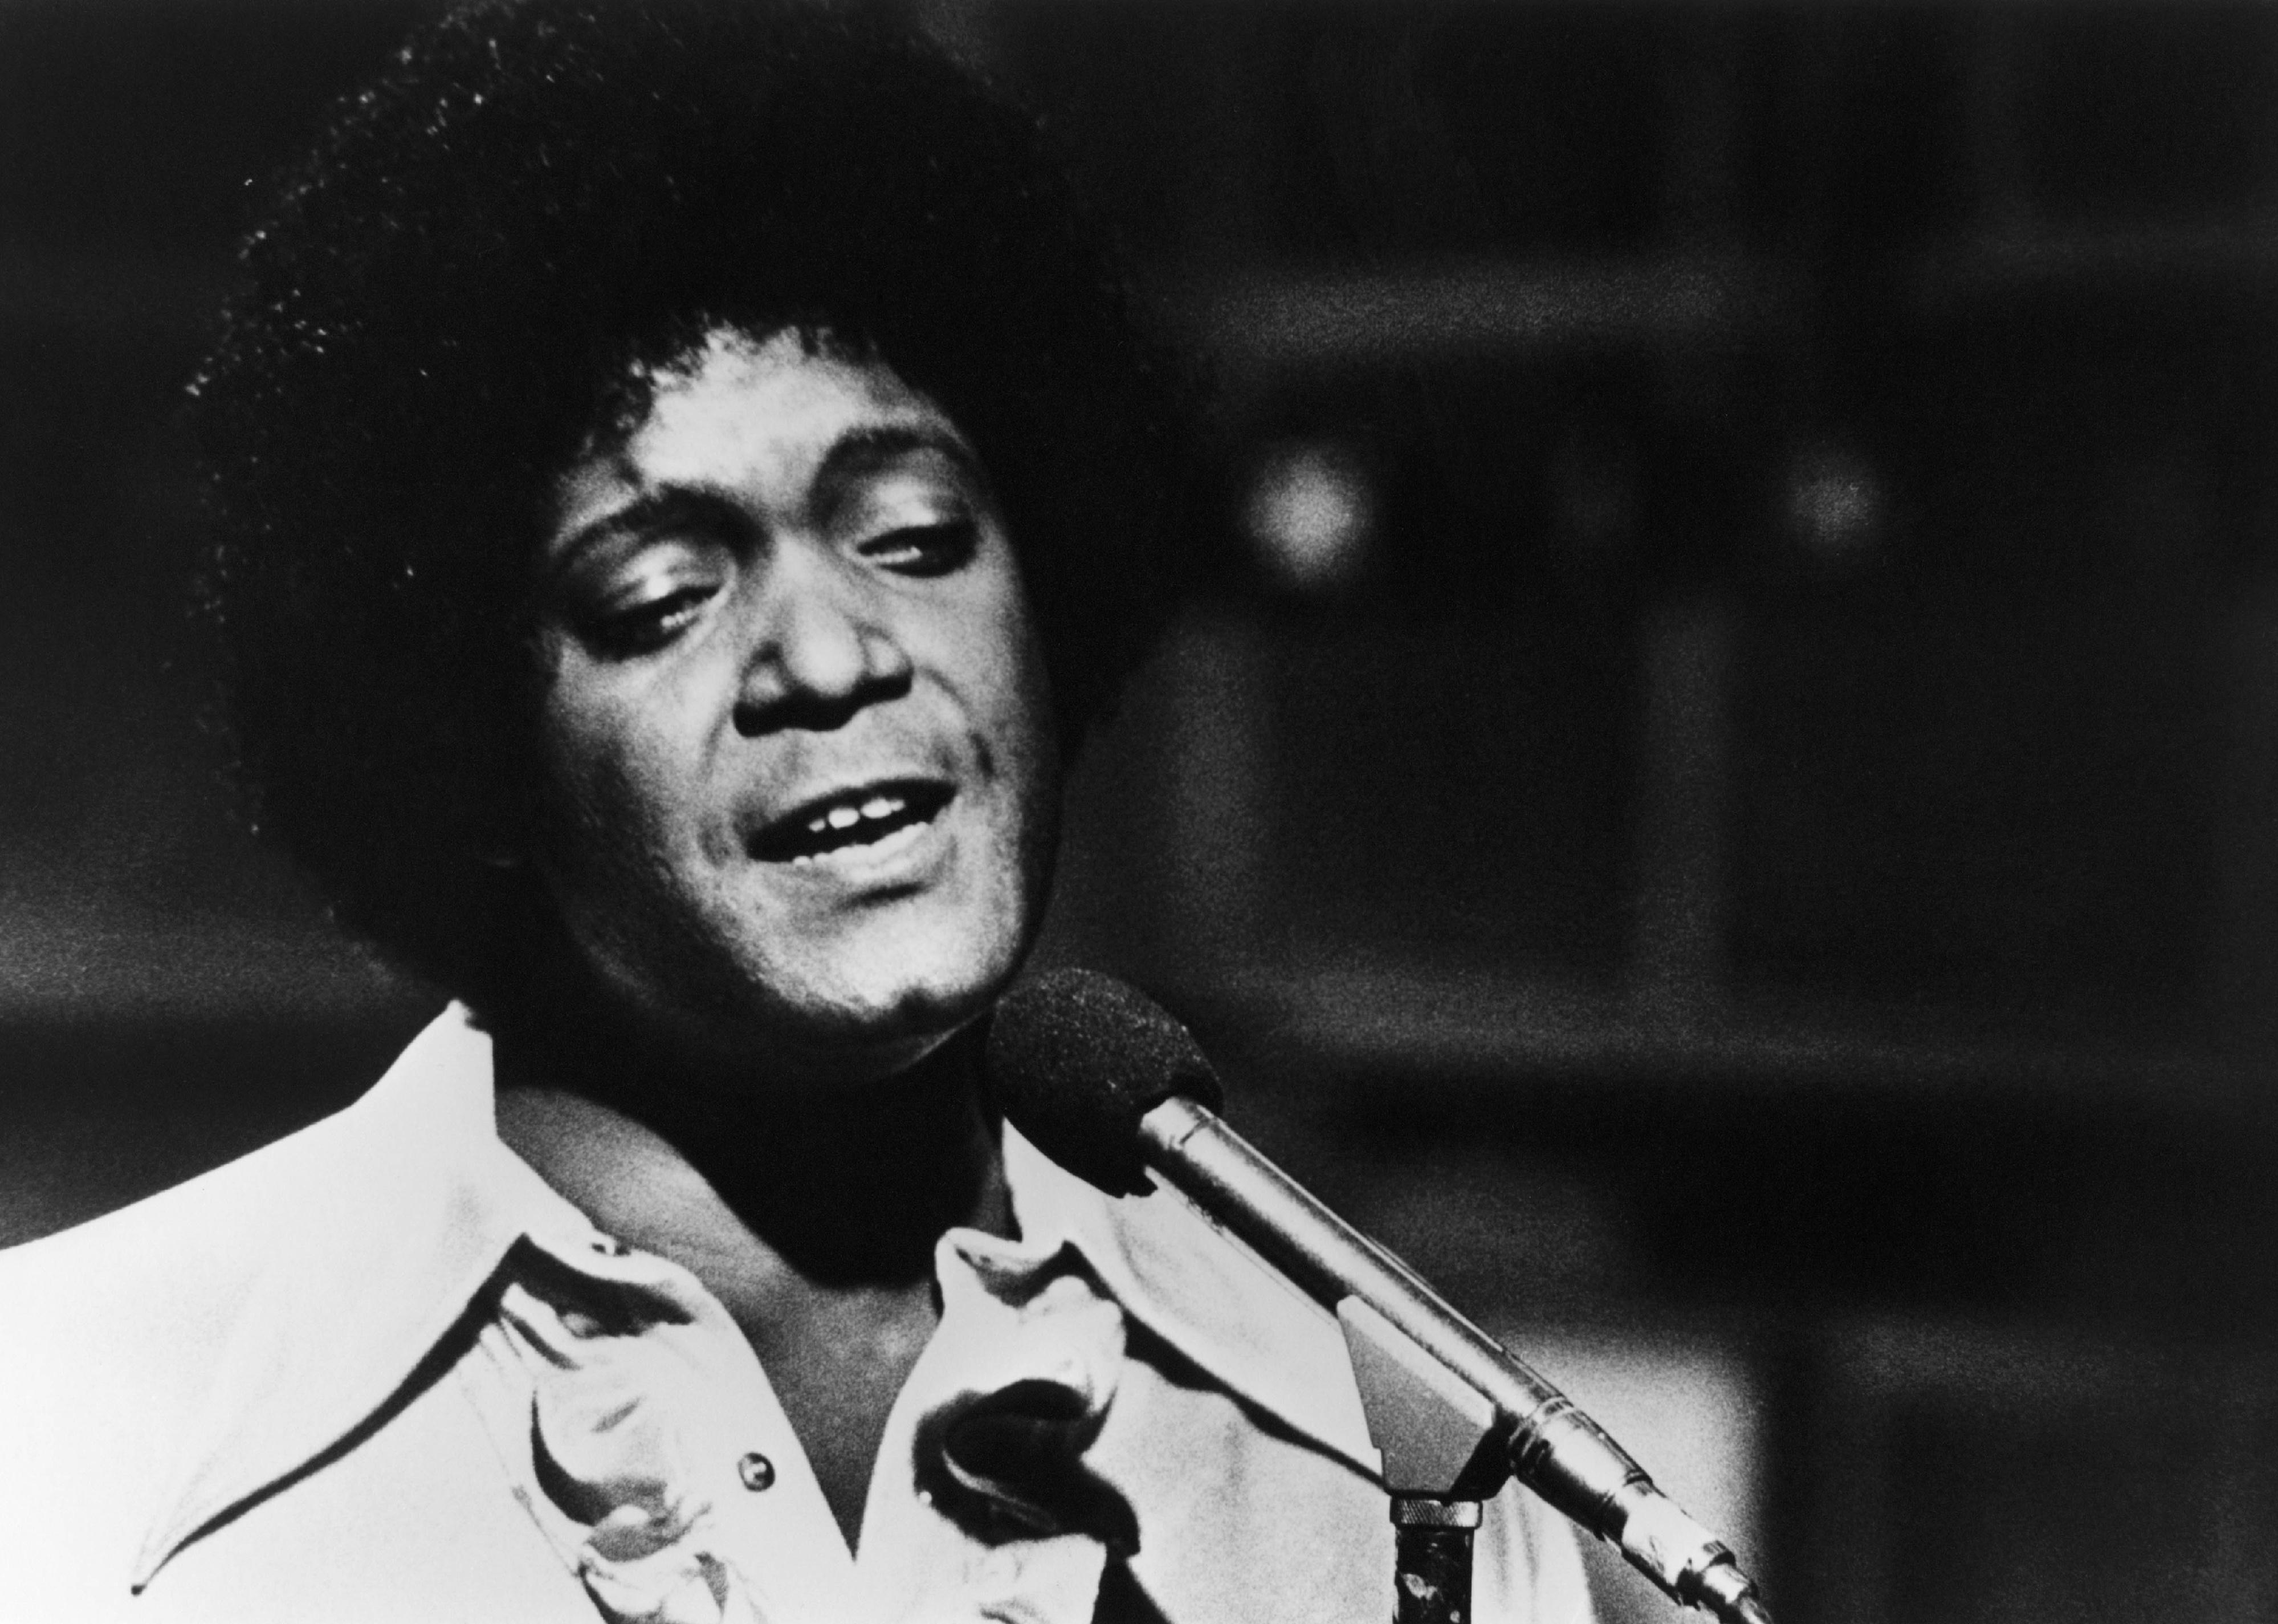 Dobie Gray performing on stage.